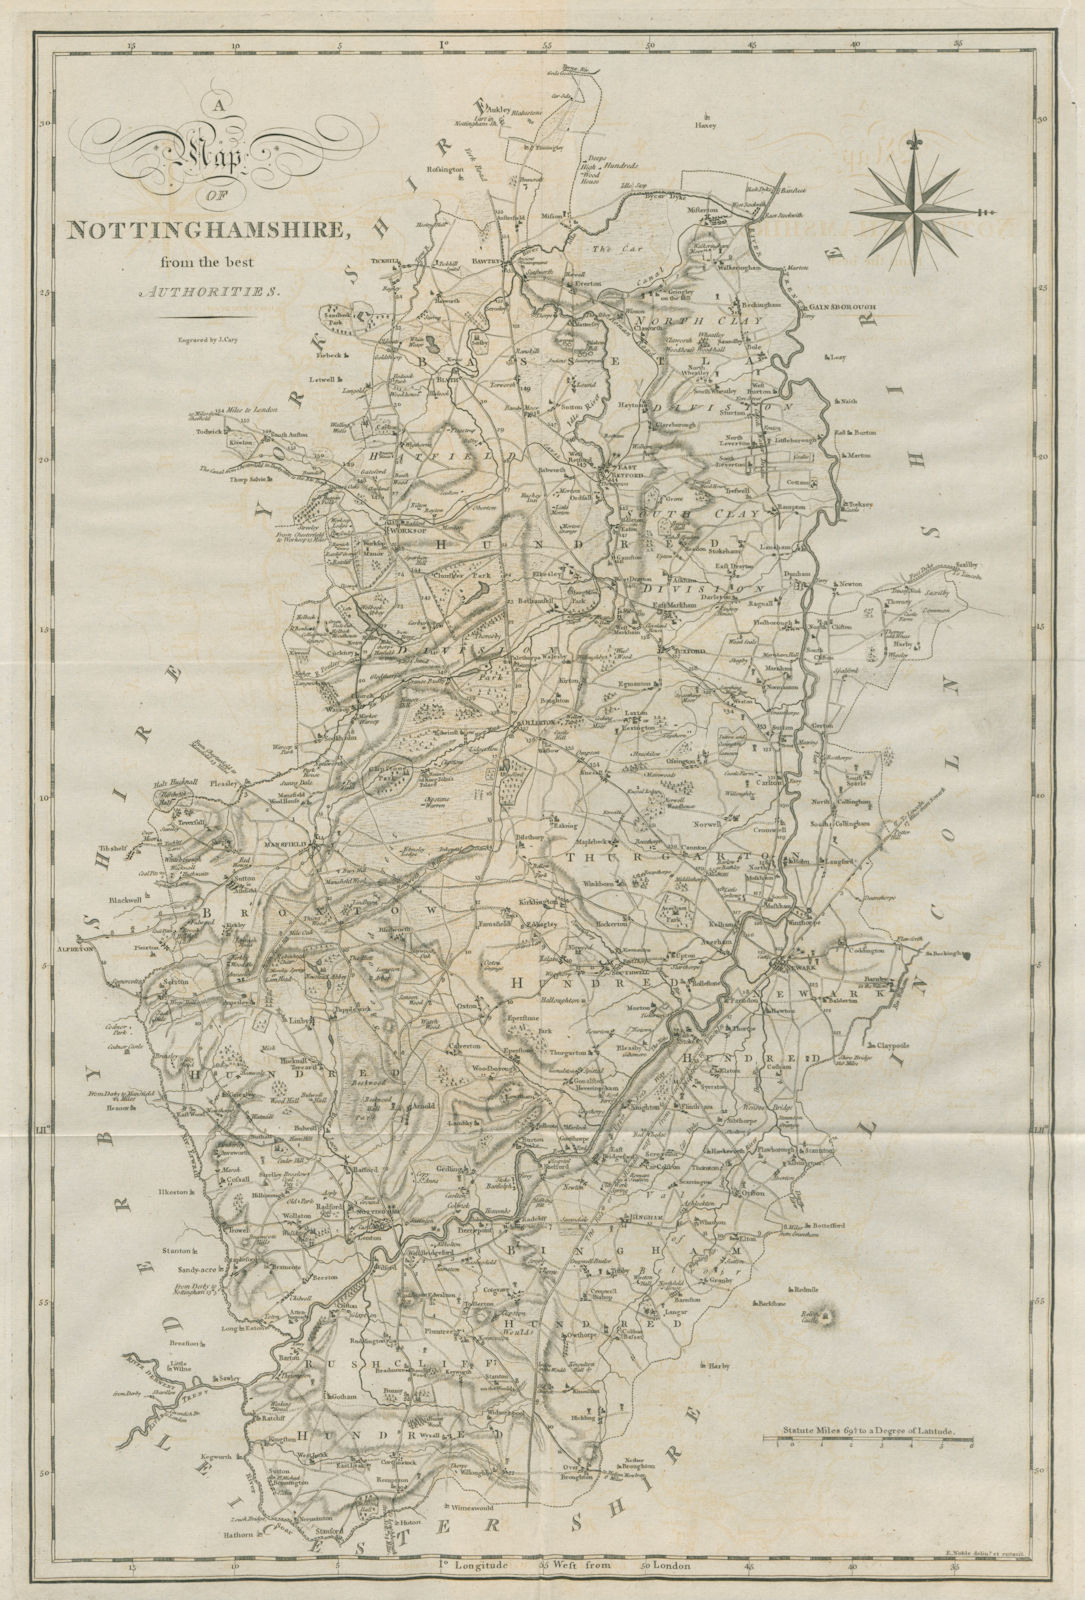 "A map of Nottinghamshire from the best authorities". County map. CARY 1789